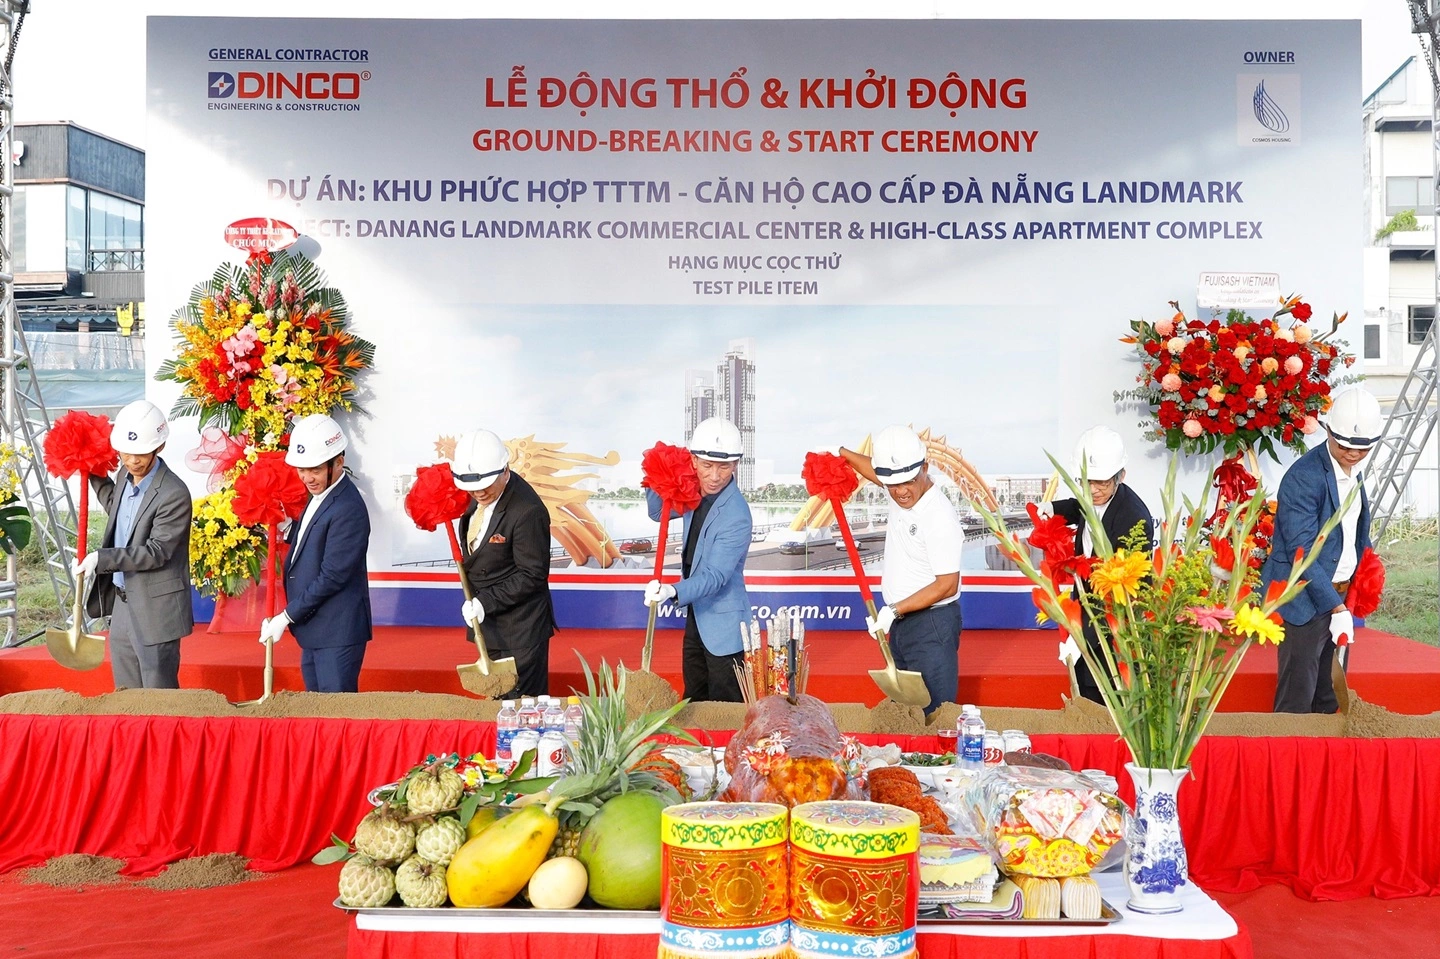 GROUND-BREAKING & START CEREMONY OF DA NANG LANDMARK COMMERCIAL CENTER & HIGH-CLASS APARTMENT COMPLEX PROJECT – TEST PILE ITEM